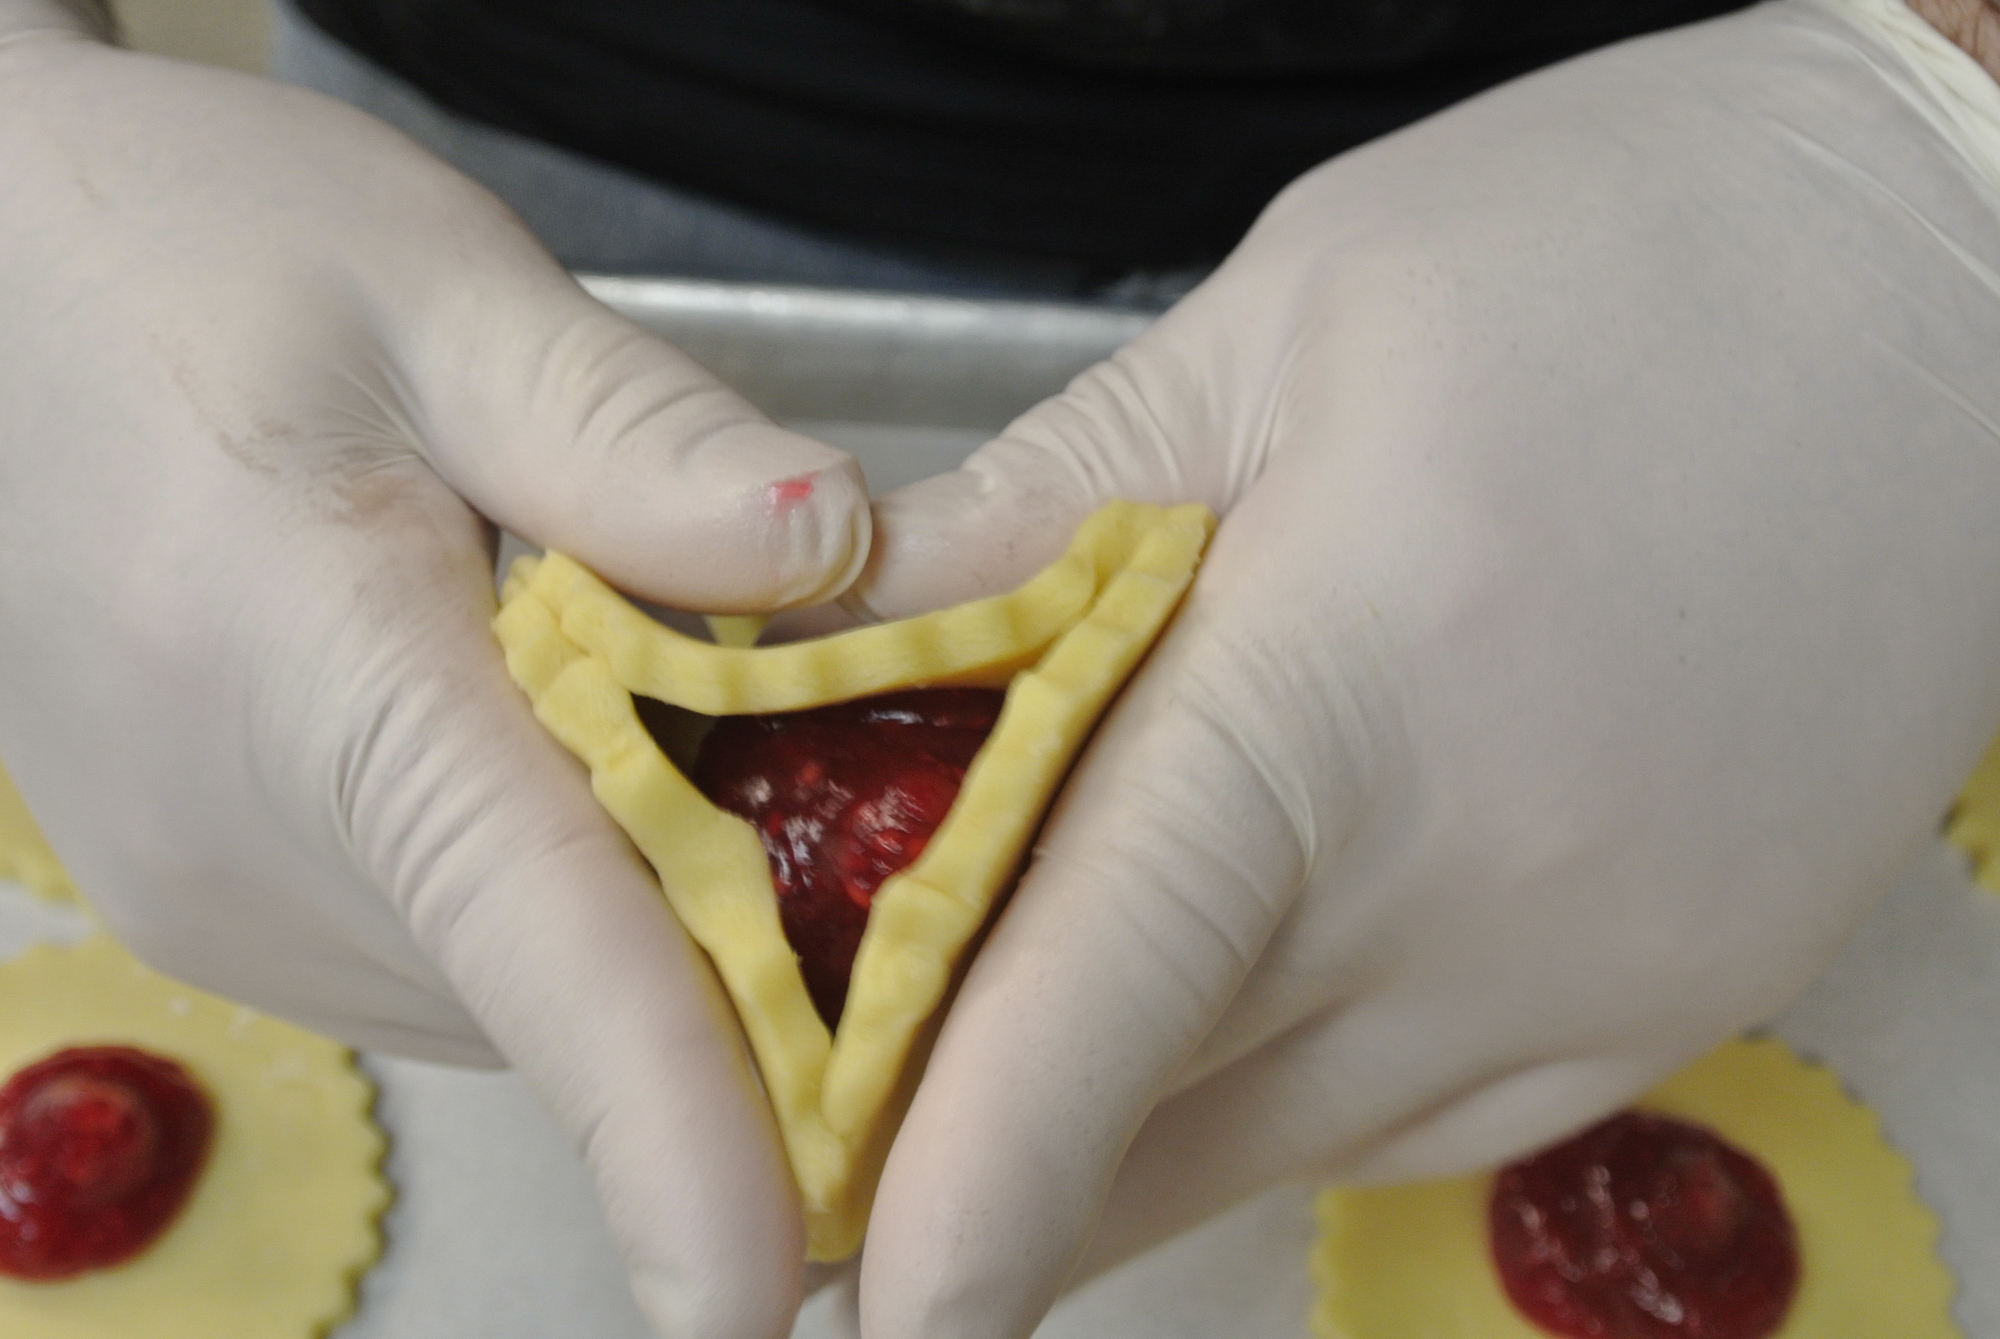 Three Brothers Bakery form Hamentaschen into a triangular filled cookie